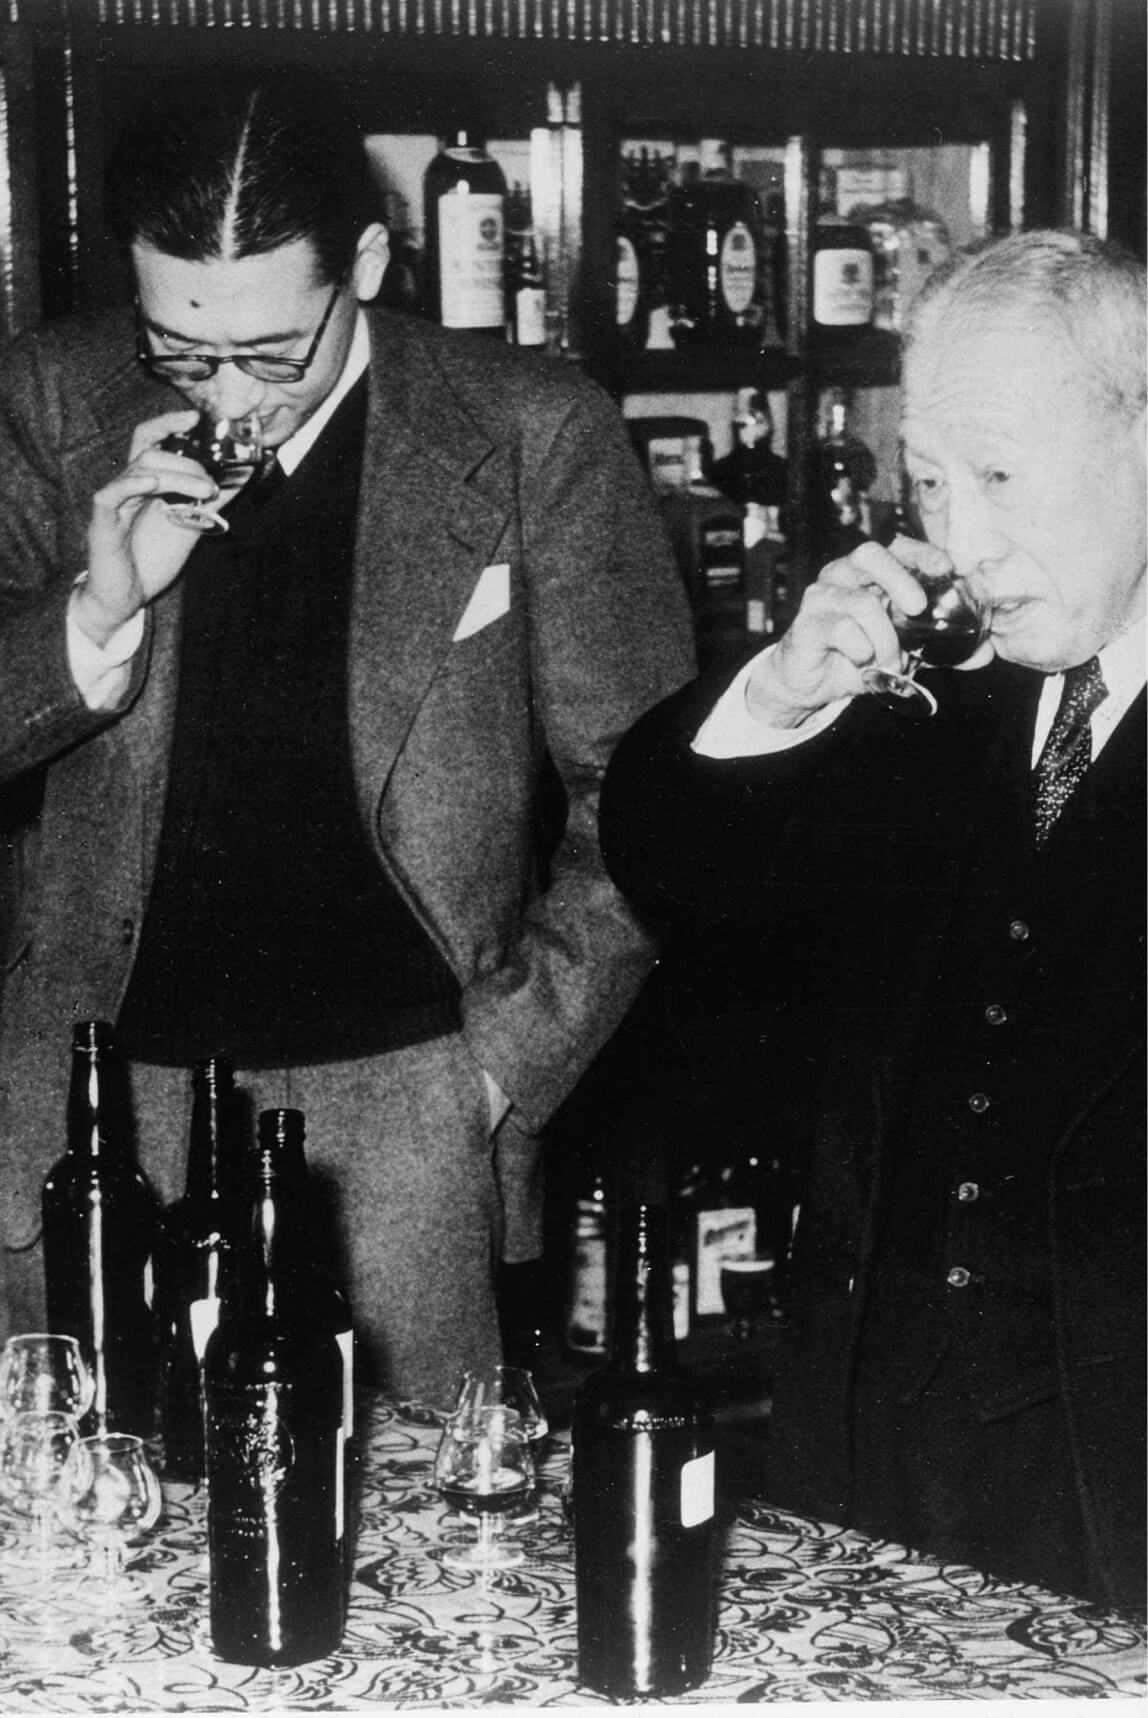 Black-and-white photo of Keizo Saji with his father, Suntory founder Shinjiro Torii, sniffing samples of Suntory product